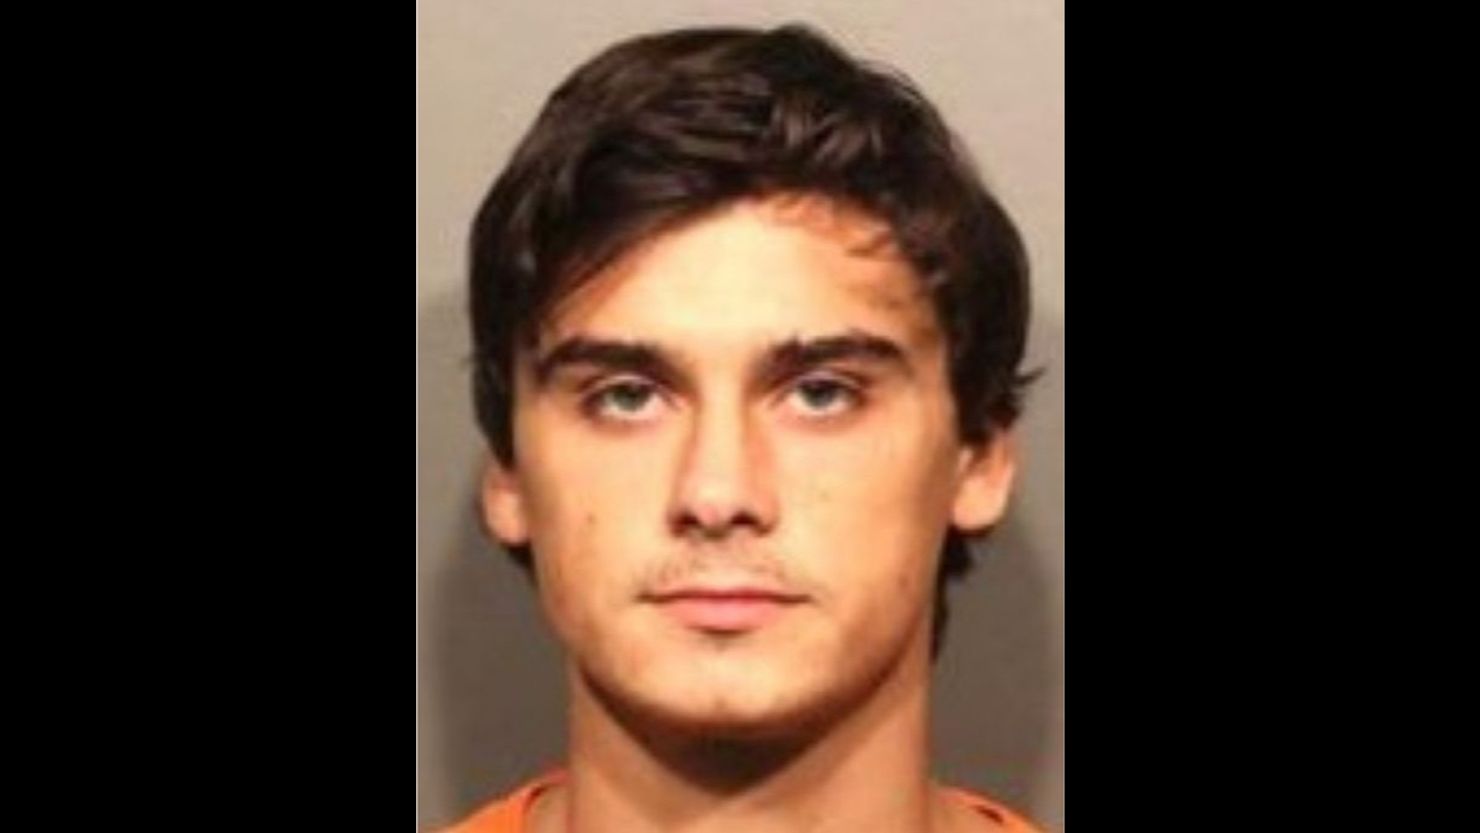 Wolfgang Ballinger, 21, faces several felony charges, authorities say.